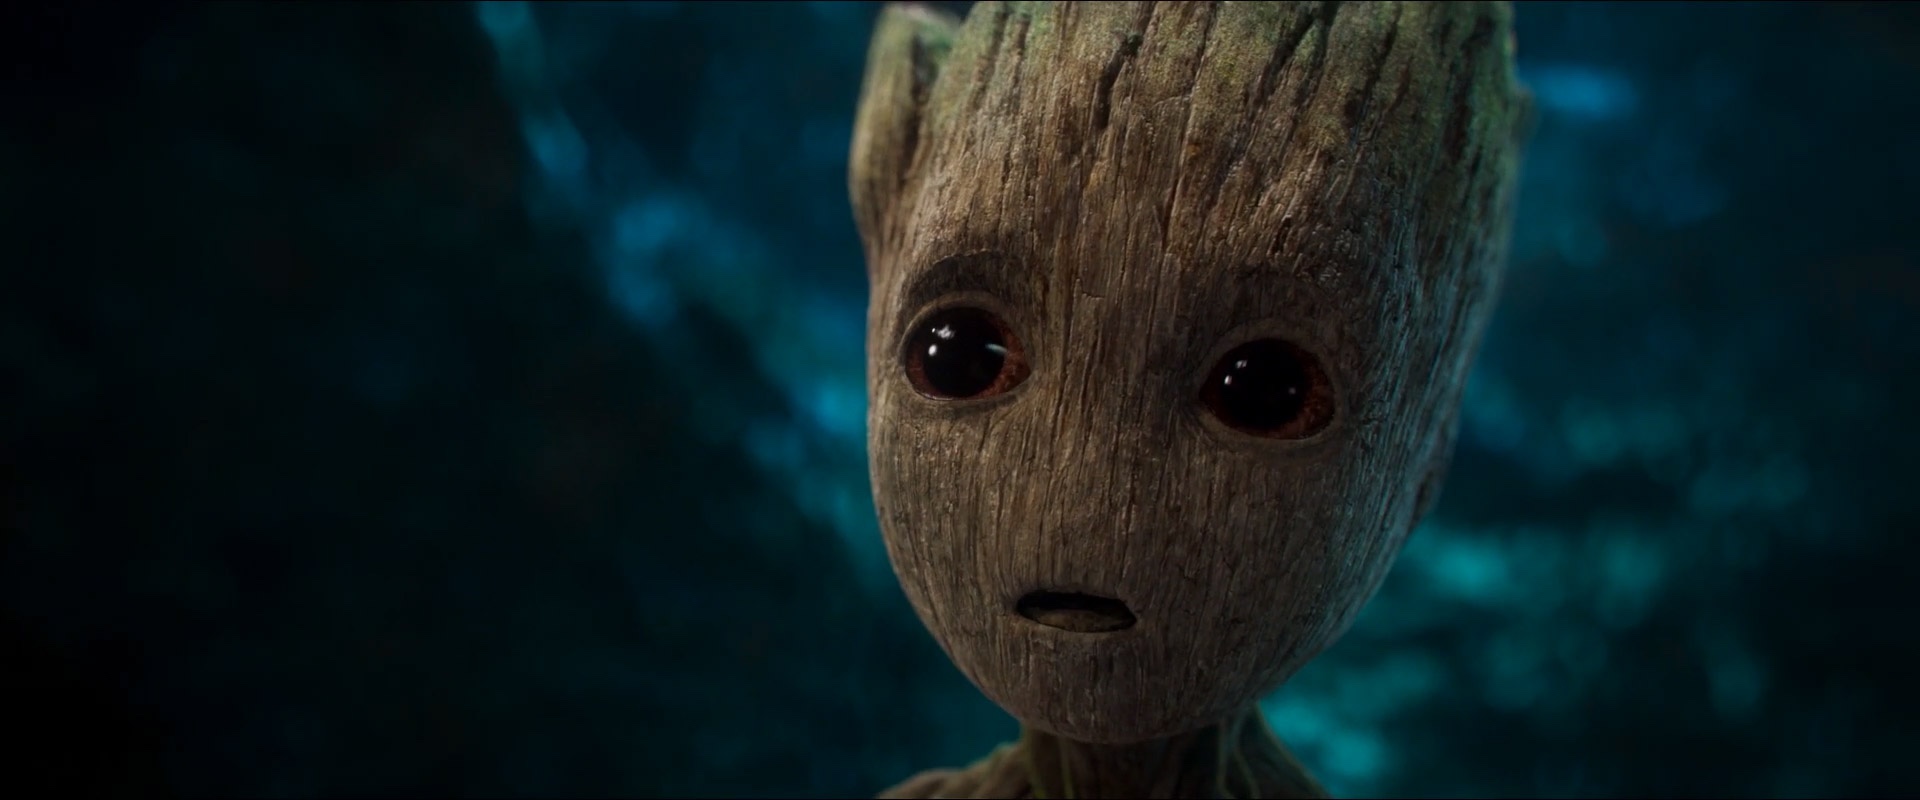 Download Hidden Details You Missed In The Guardians Of The Galaxy Vol 2 Trailer